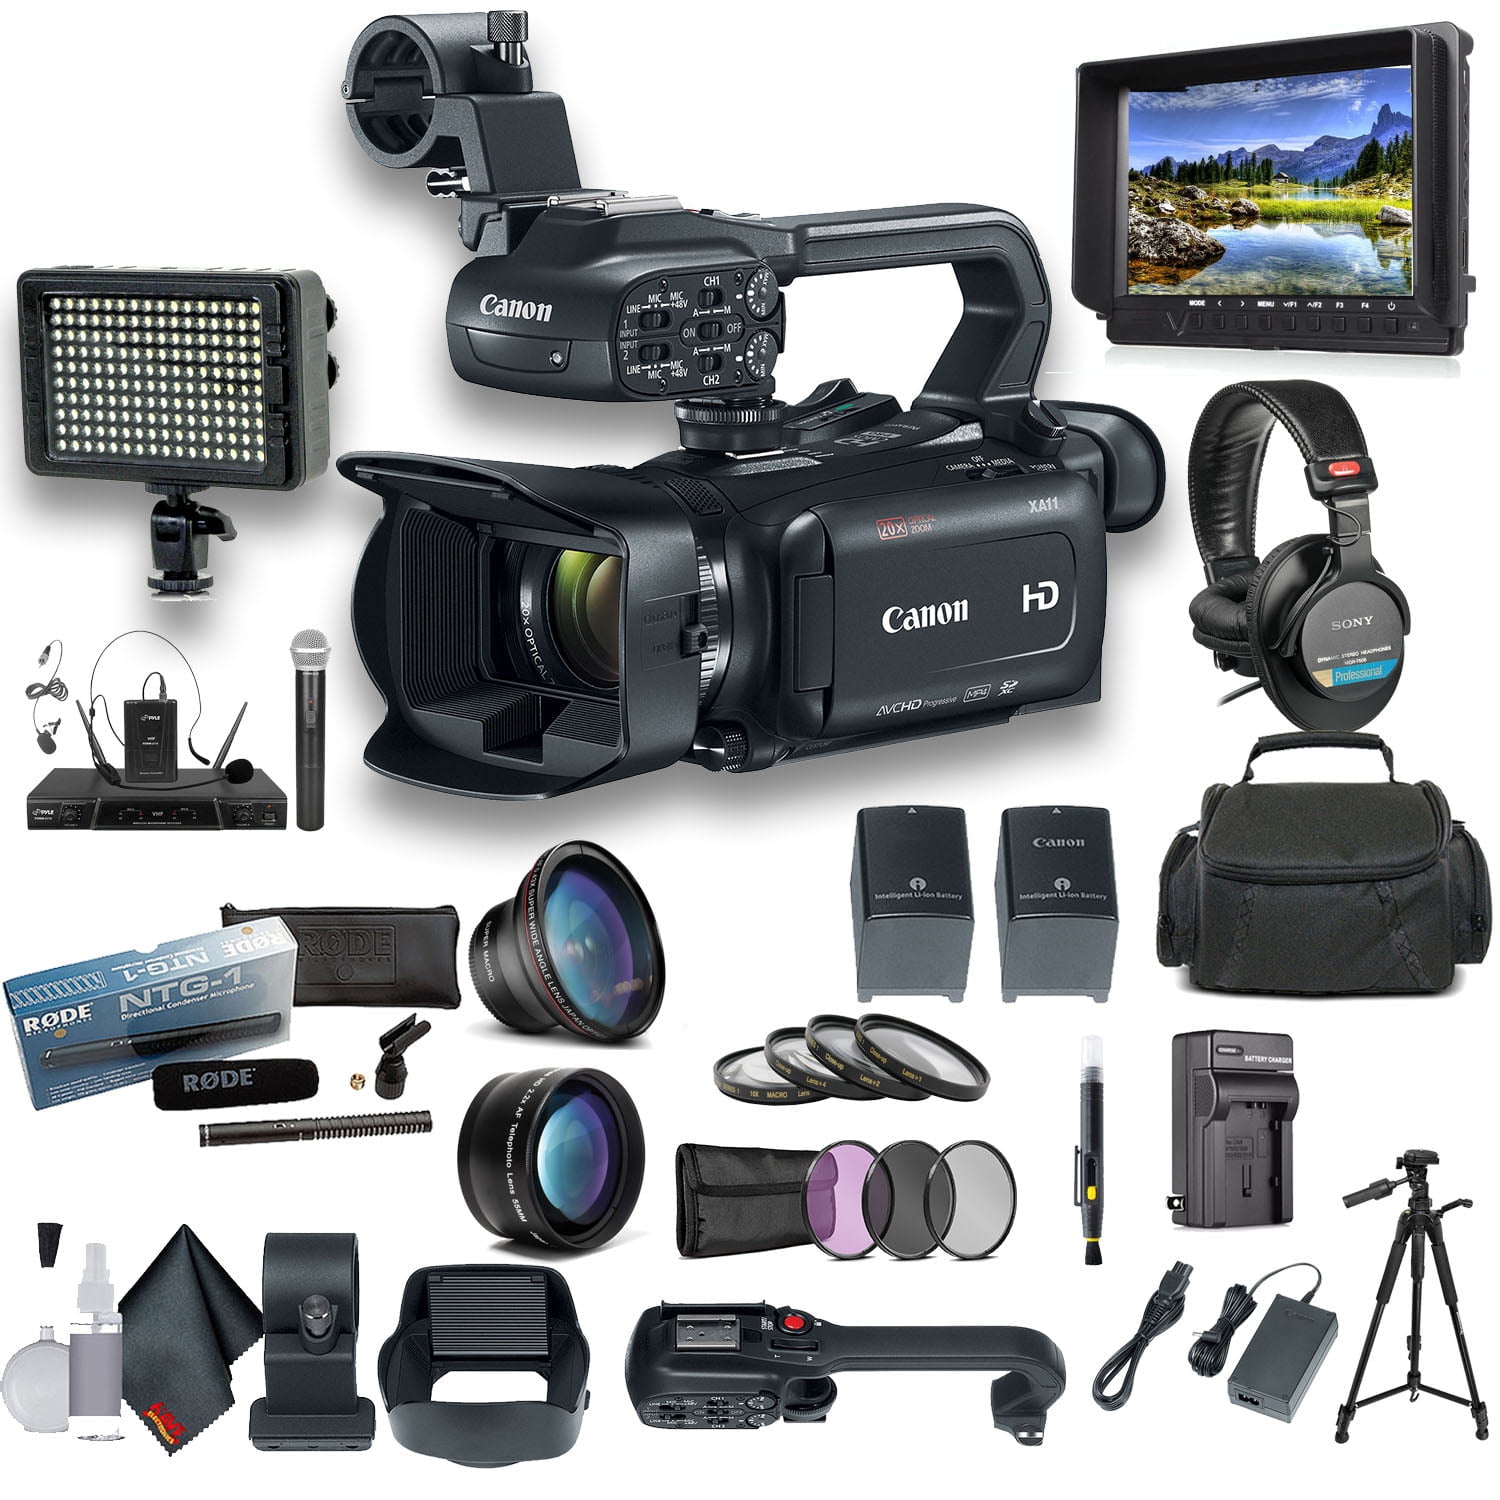 artículo voluntario impacto Canon XA11 Compact Full HD Camcorder with HDMI and Composite Output  FilmMaker Bundle. Includes Extra Battery, Case, LED Light, External  Monitor, Professional Mic, Sony Headphones, Tripod And More - Walmart.com